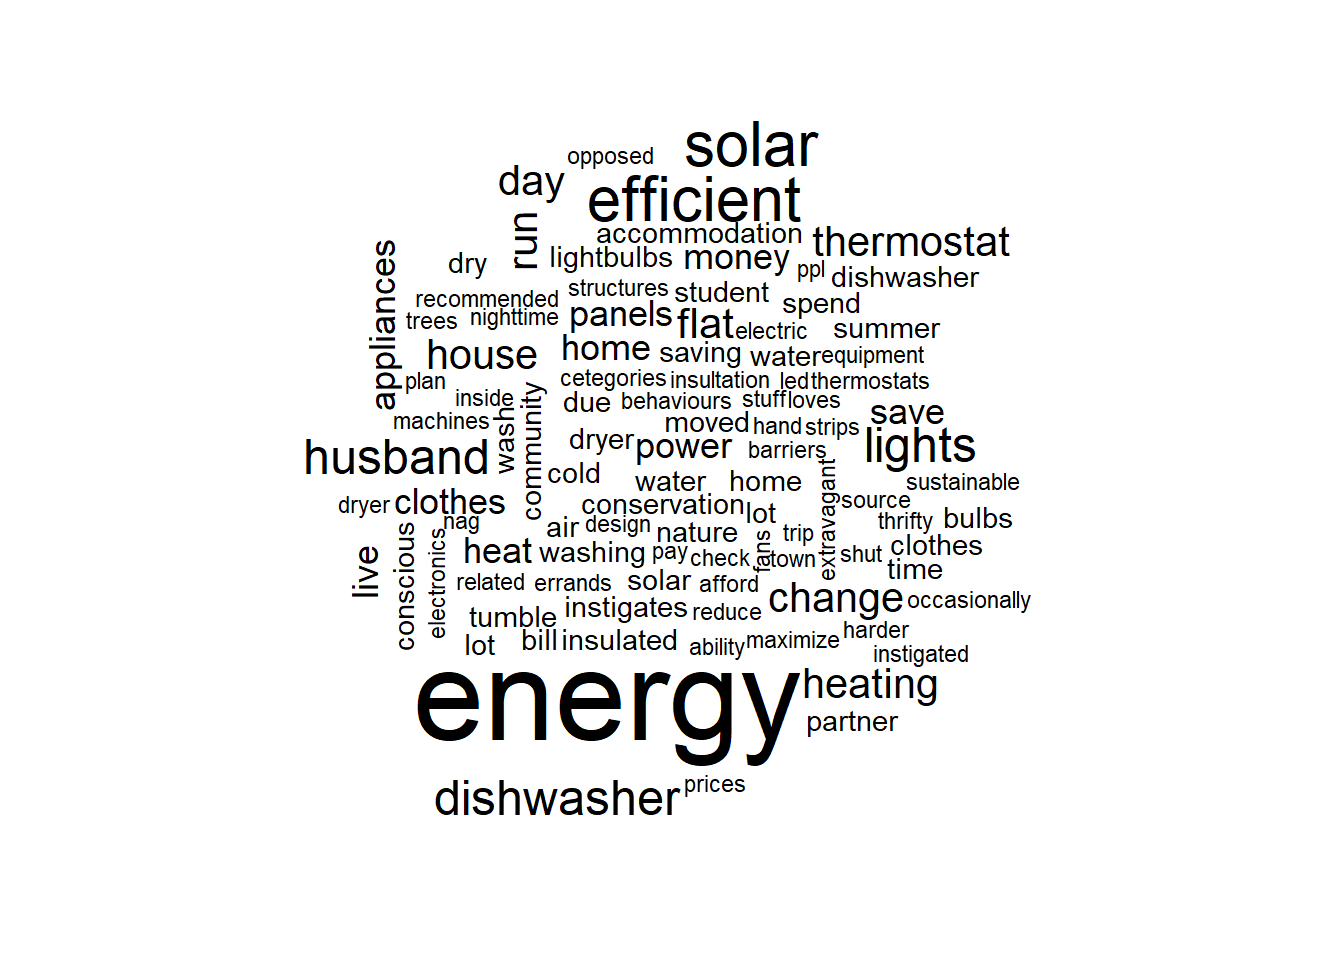 Word cloud of sustainability buzz words